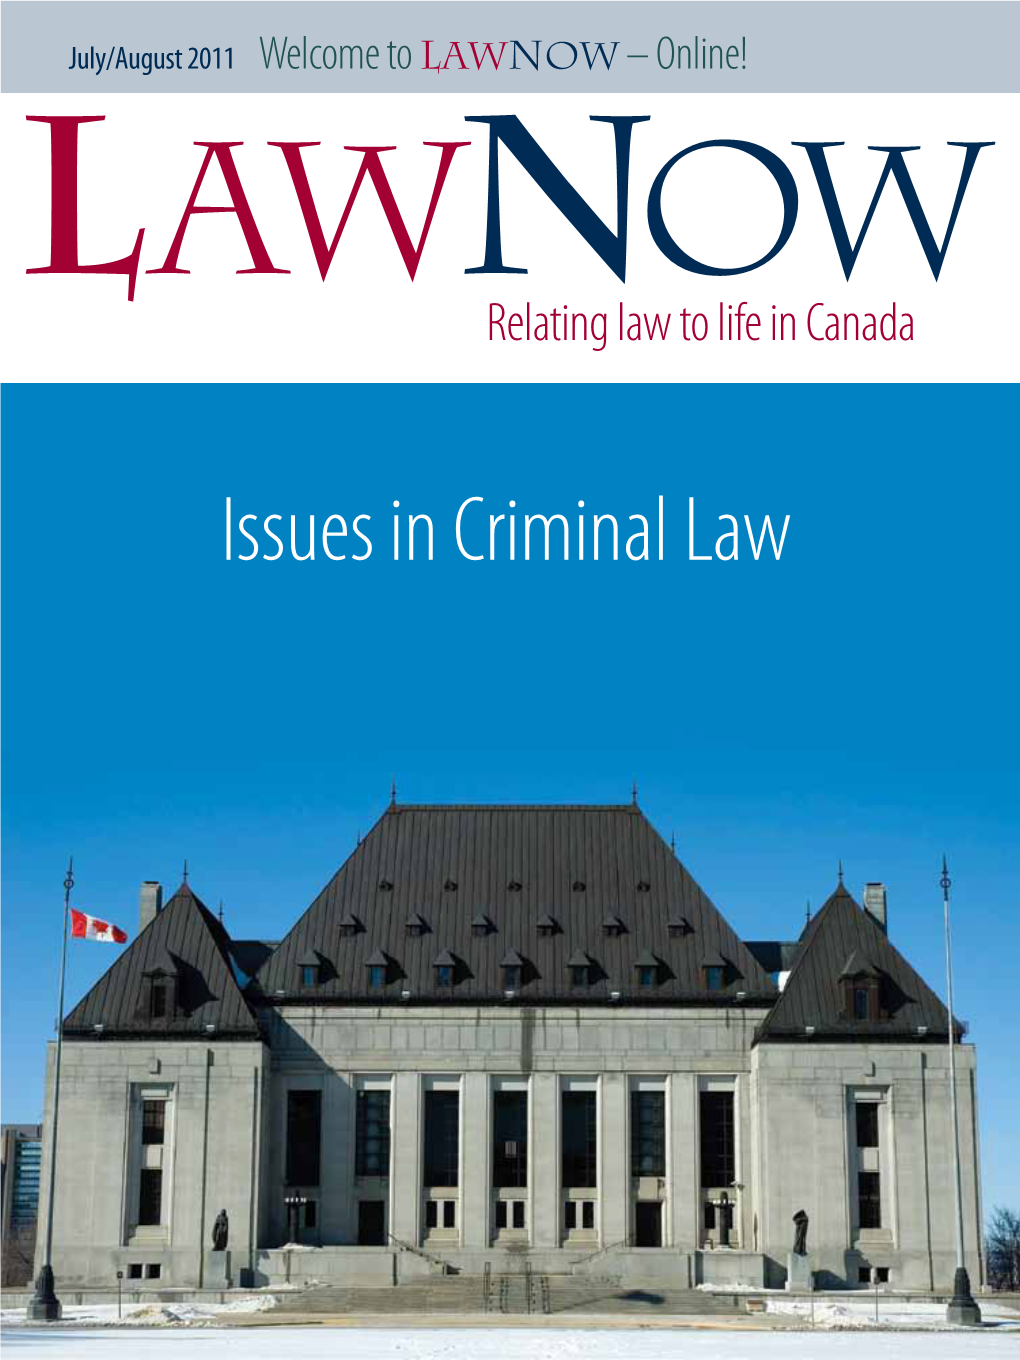 Issues in Criminal Law Contents July/August 2011